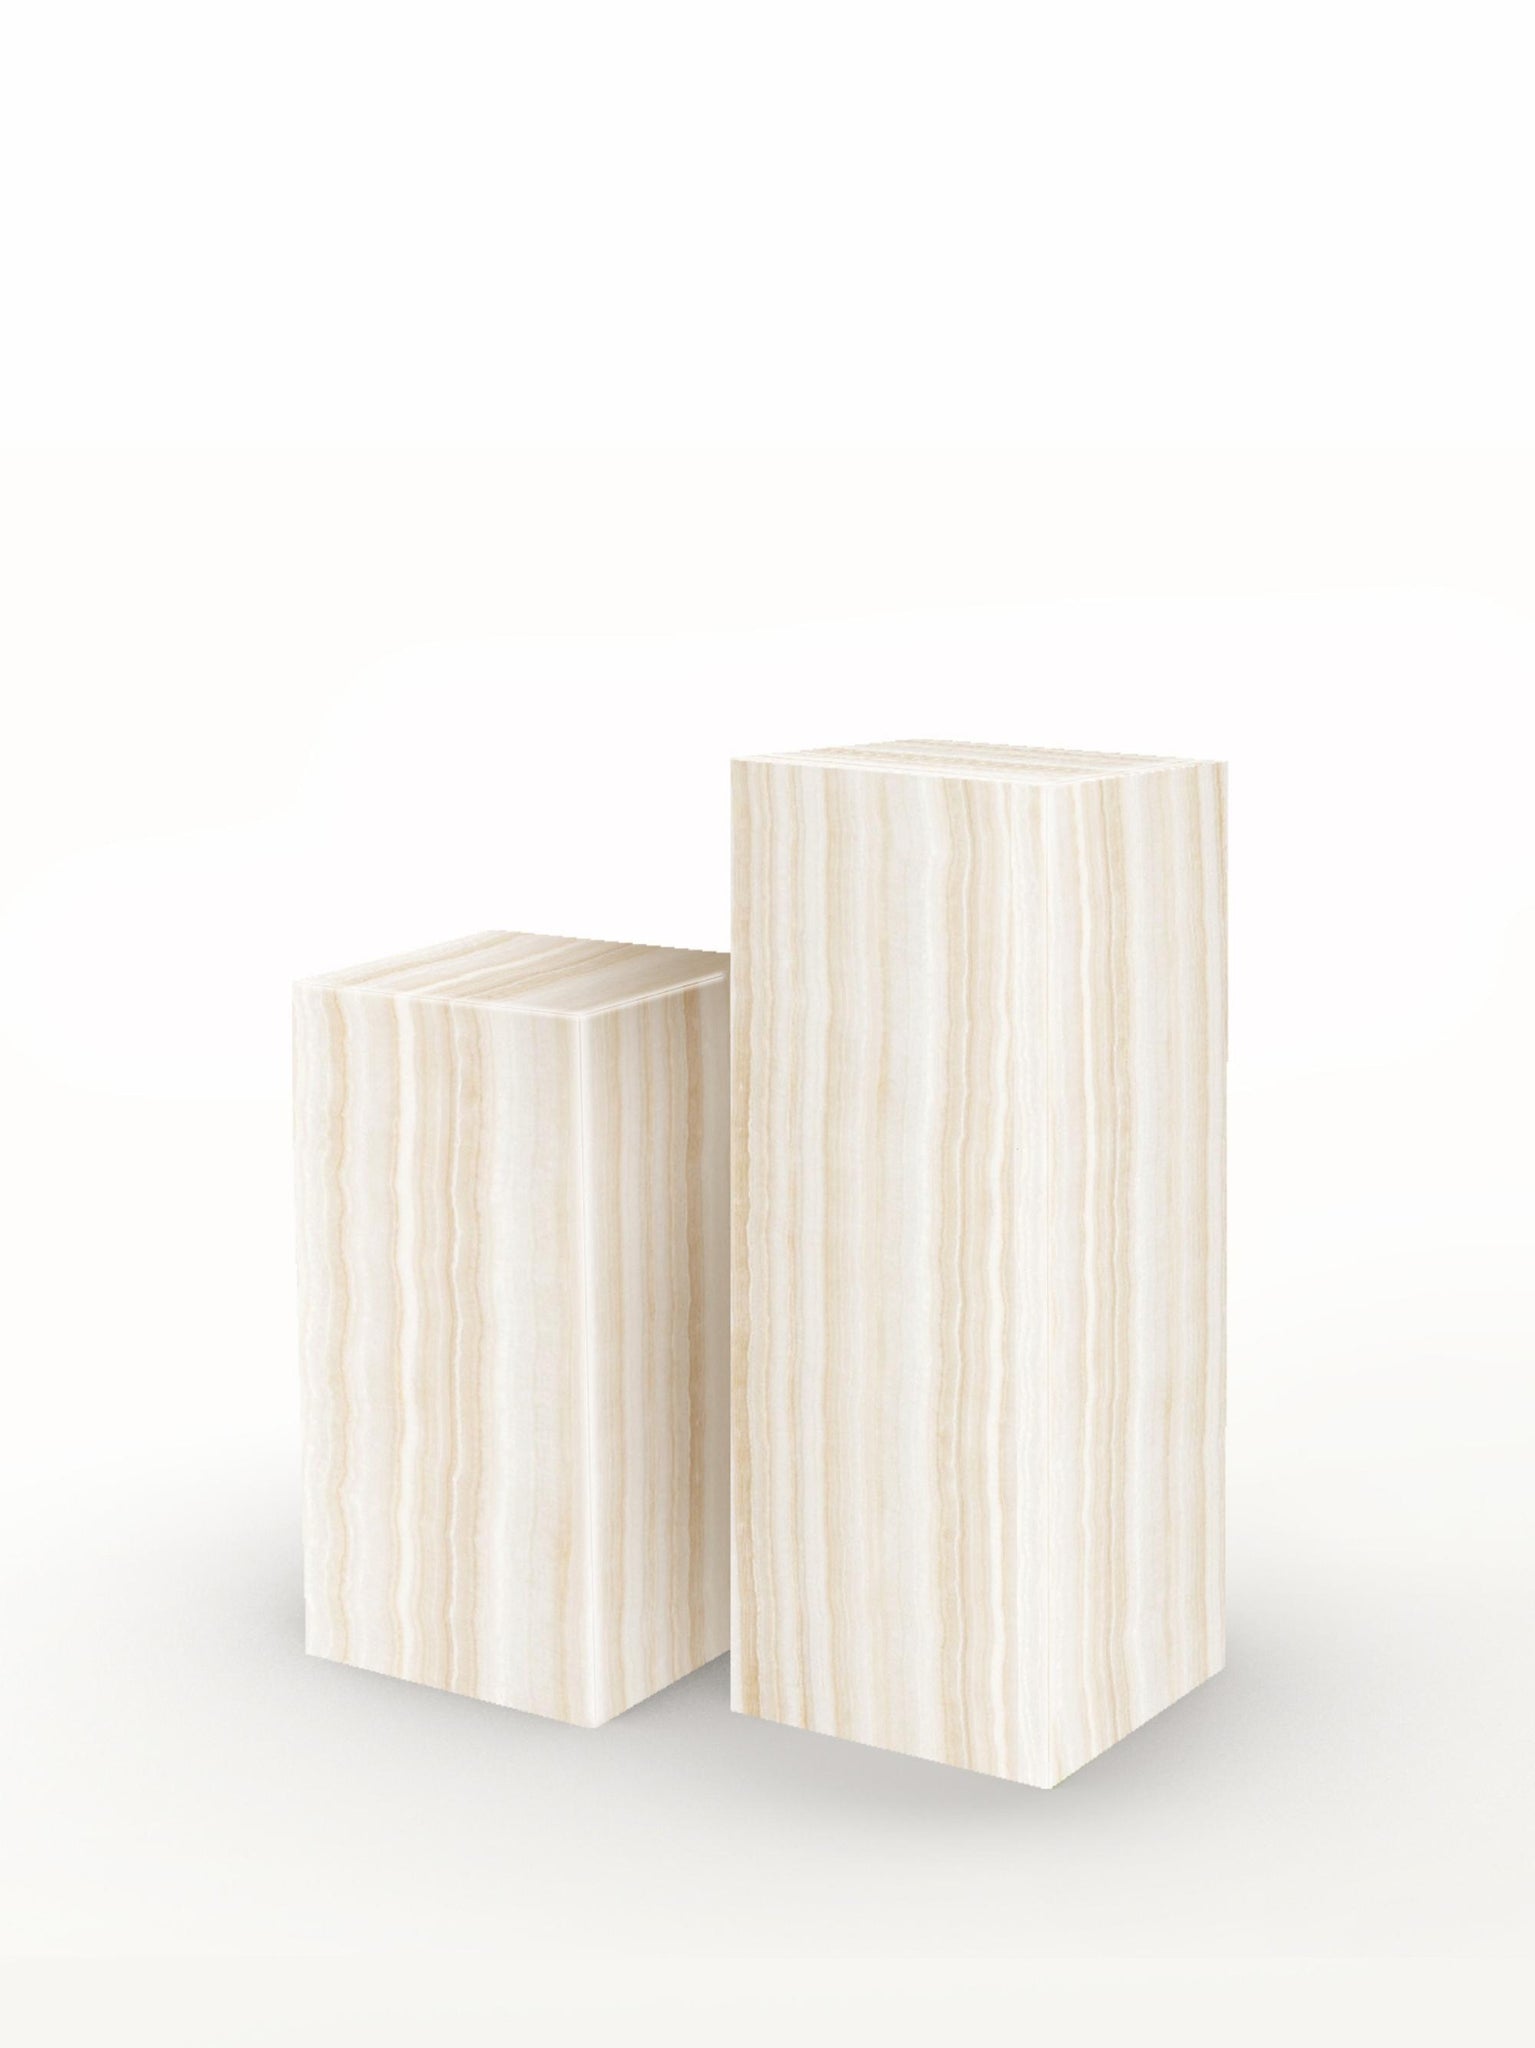 [Made-to-Order] FORTE Plinth – no. 60